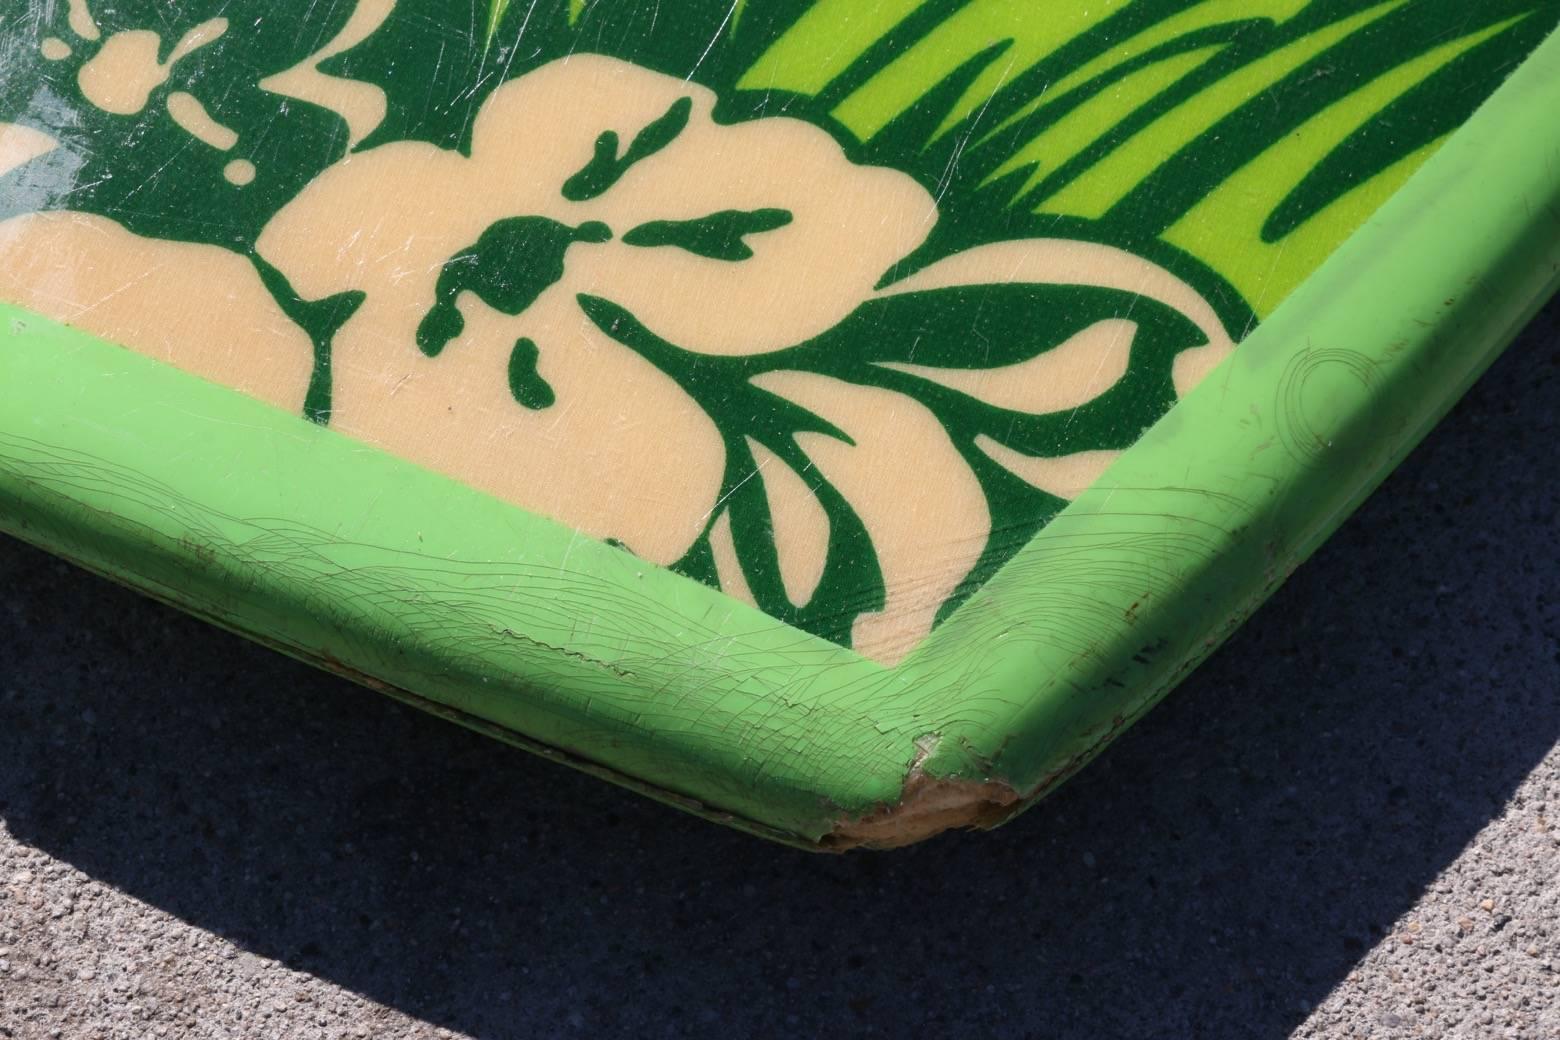 American Vibrant Green Floral Dextra Bellyboard Surfboard, circa 1965 For Sale